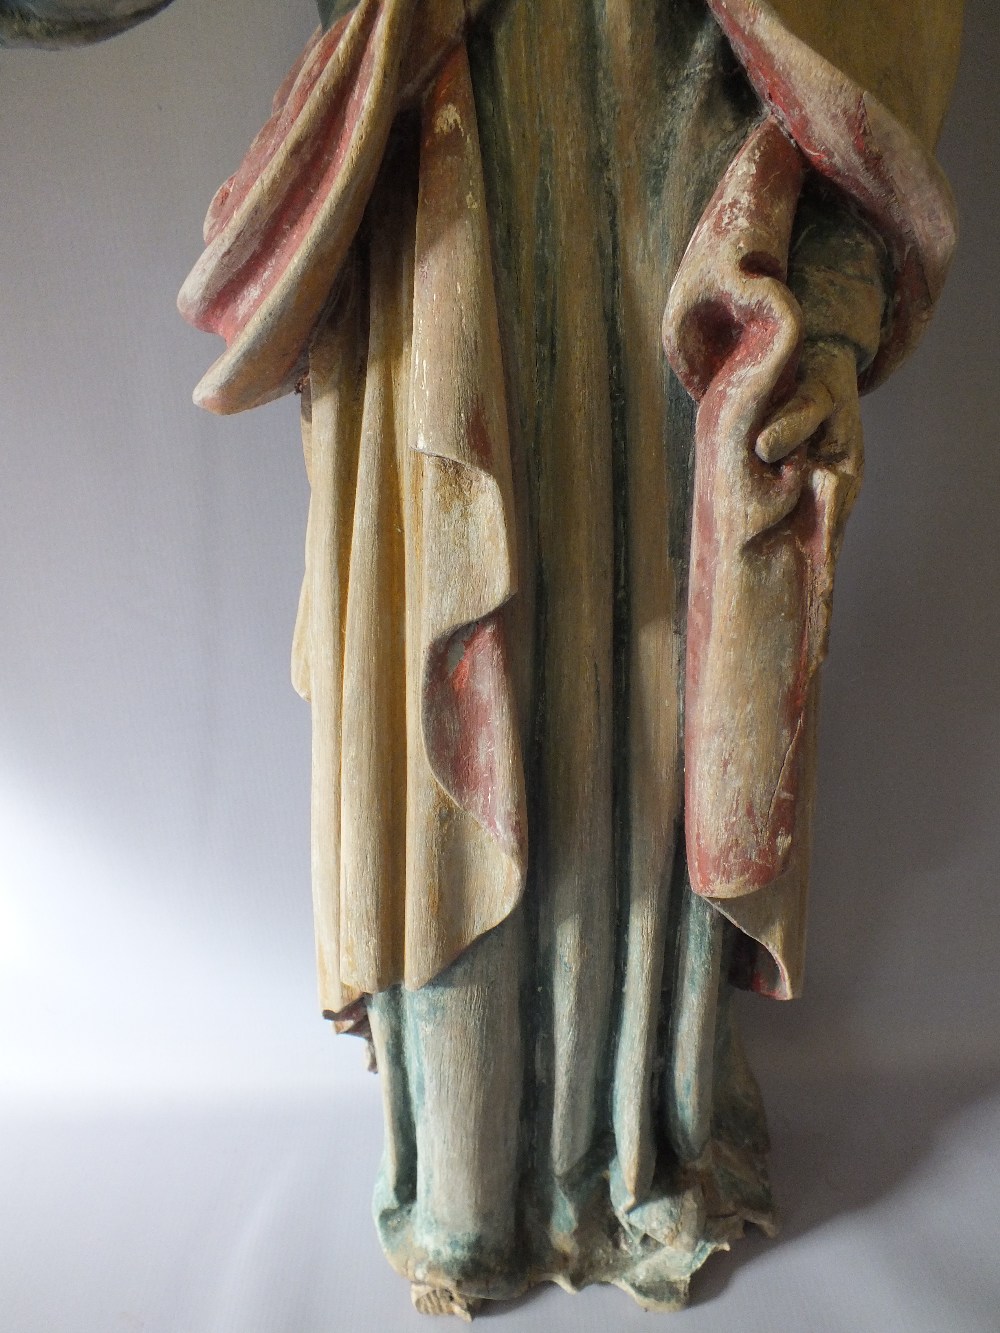 A LARGE EARLY CARVED WOOD RELIGIOUS STATUE DEPICTING A SAINT, with coloured decoration, H 85 cm - Image 3 of 4